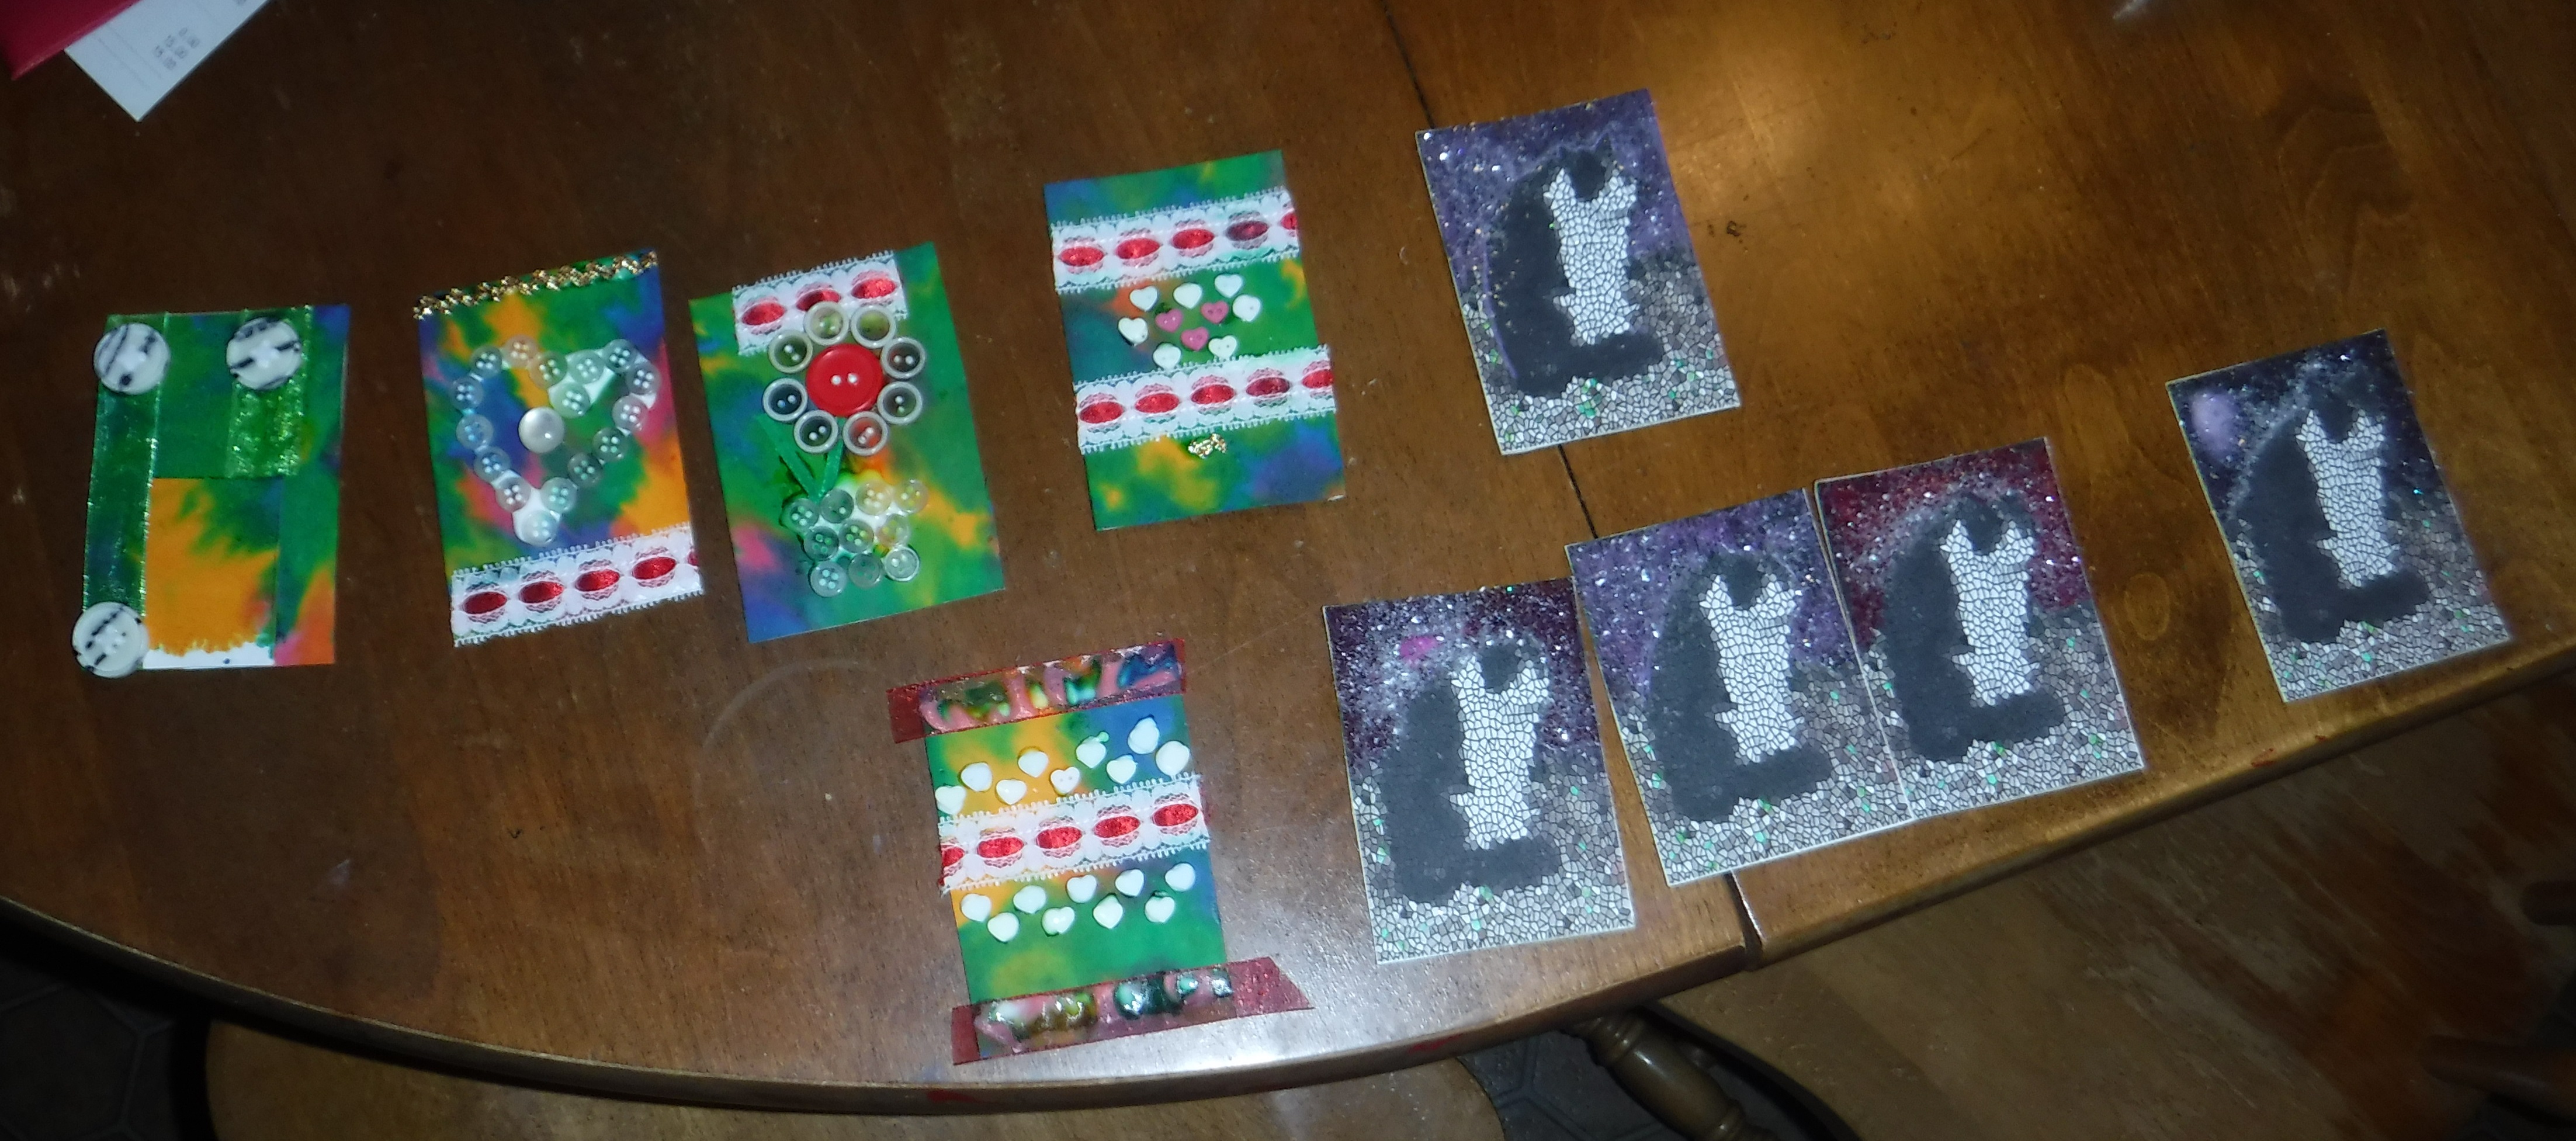 Photo I took of the Artist Trading Cards I made tonight